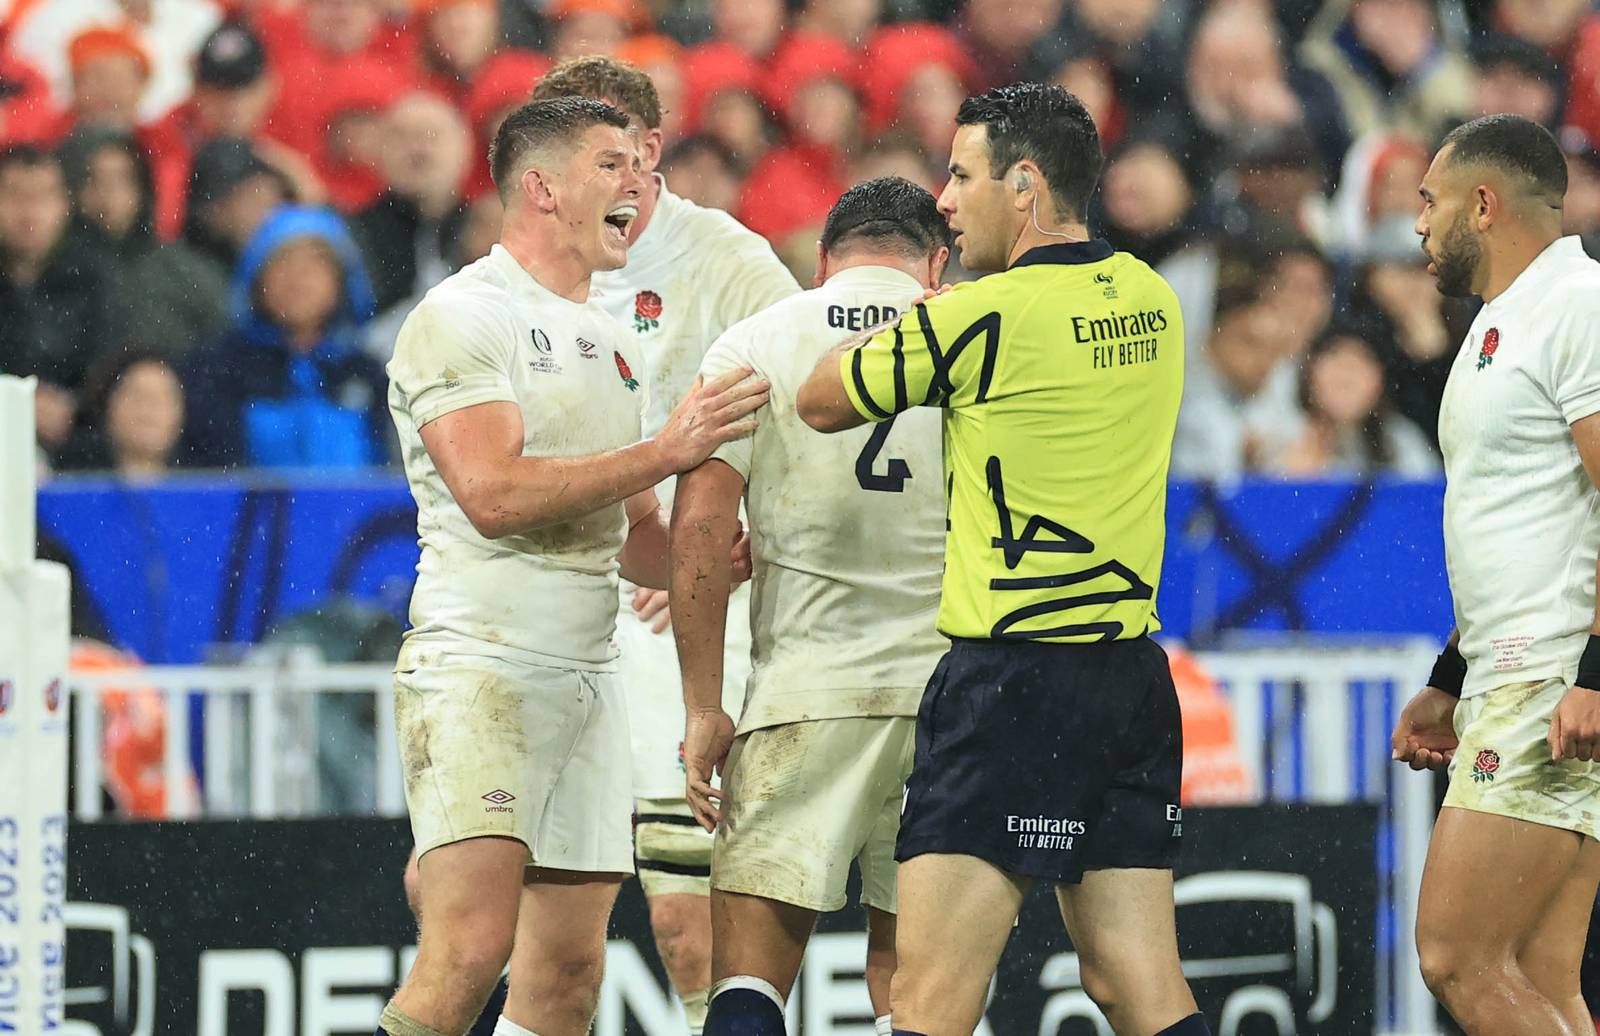 England’s Owen Farrell argues with referee Ben O’Keefe during his side's Rugby World Cup defeat